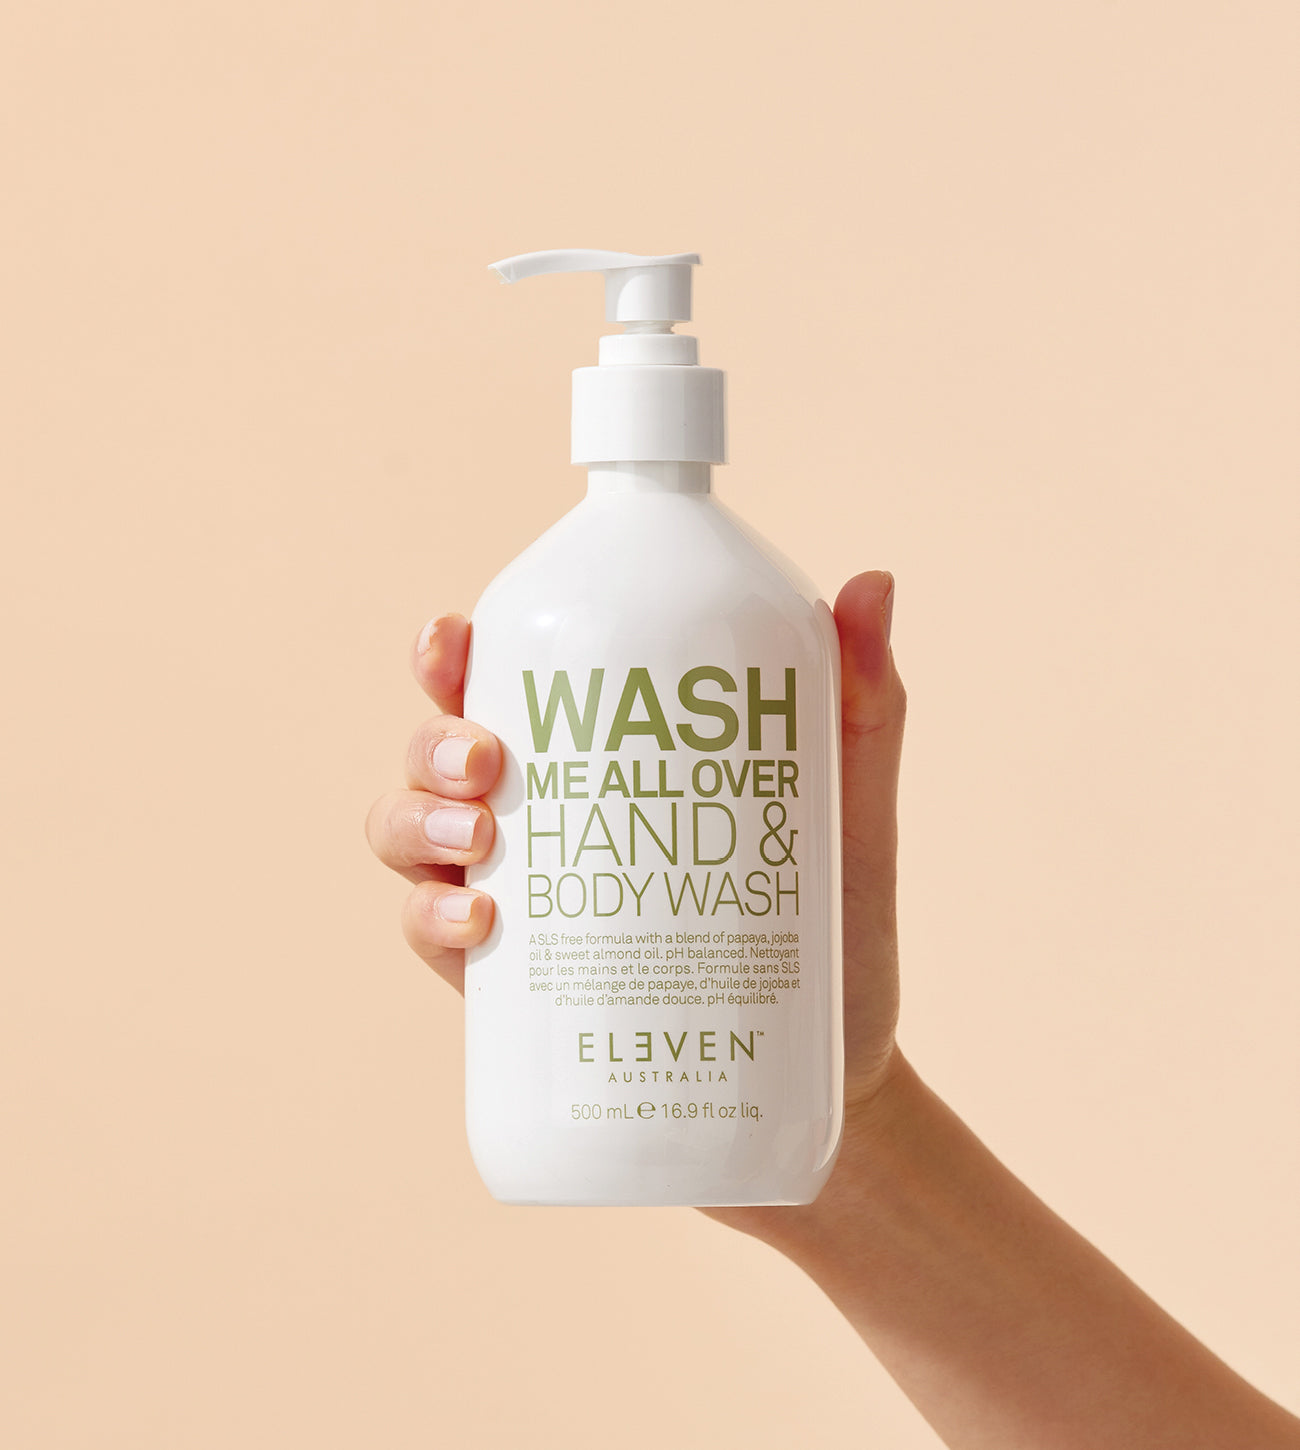 WASH ME ALL OVER HAND AND BODY WASH is Ph balanced, SLS free formula packed with natural oils. While the Papaya Extract and Almond Oil Exfoliates; Orange, Lavender and Coconut Oils hydrate and repair the skin. Jojoba Oil then protects against environmental damage. This is the best smelling body wash.